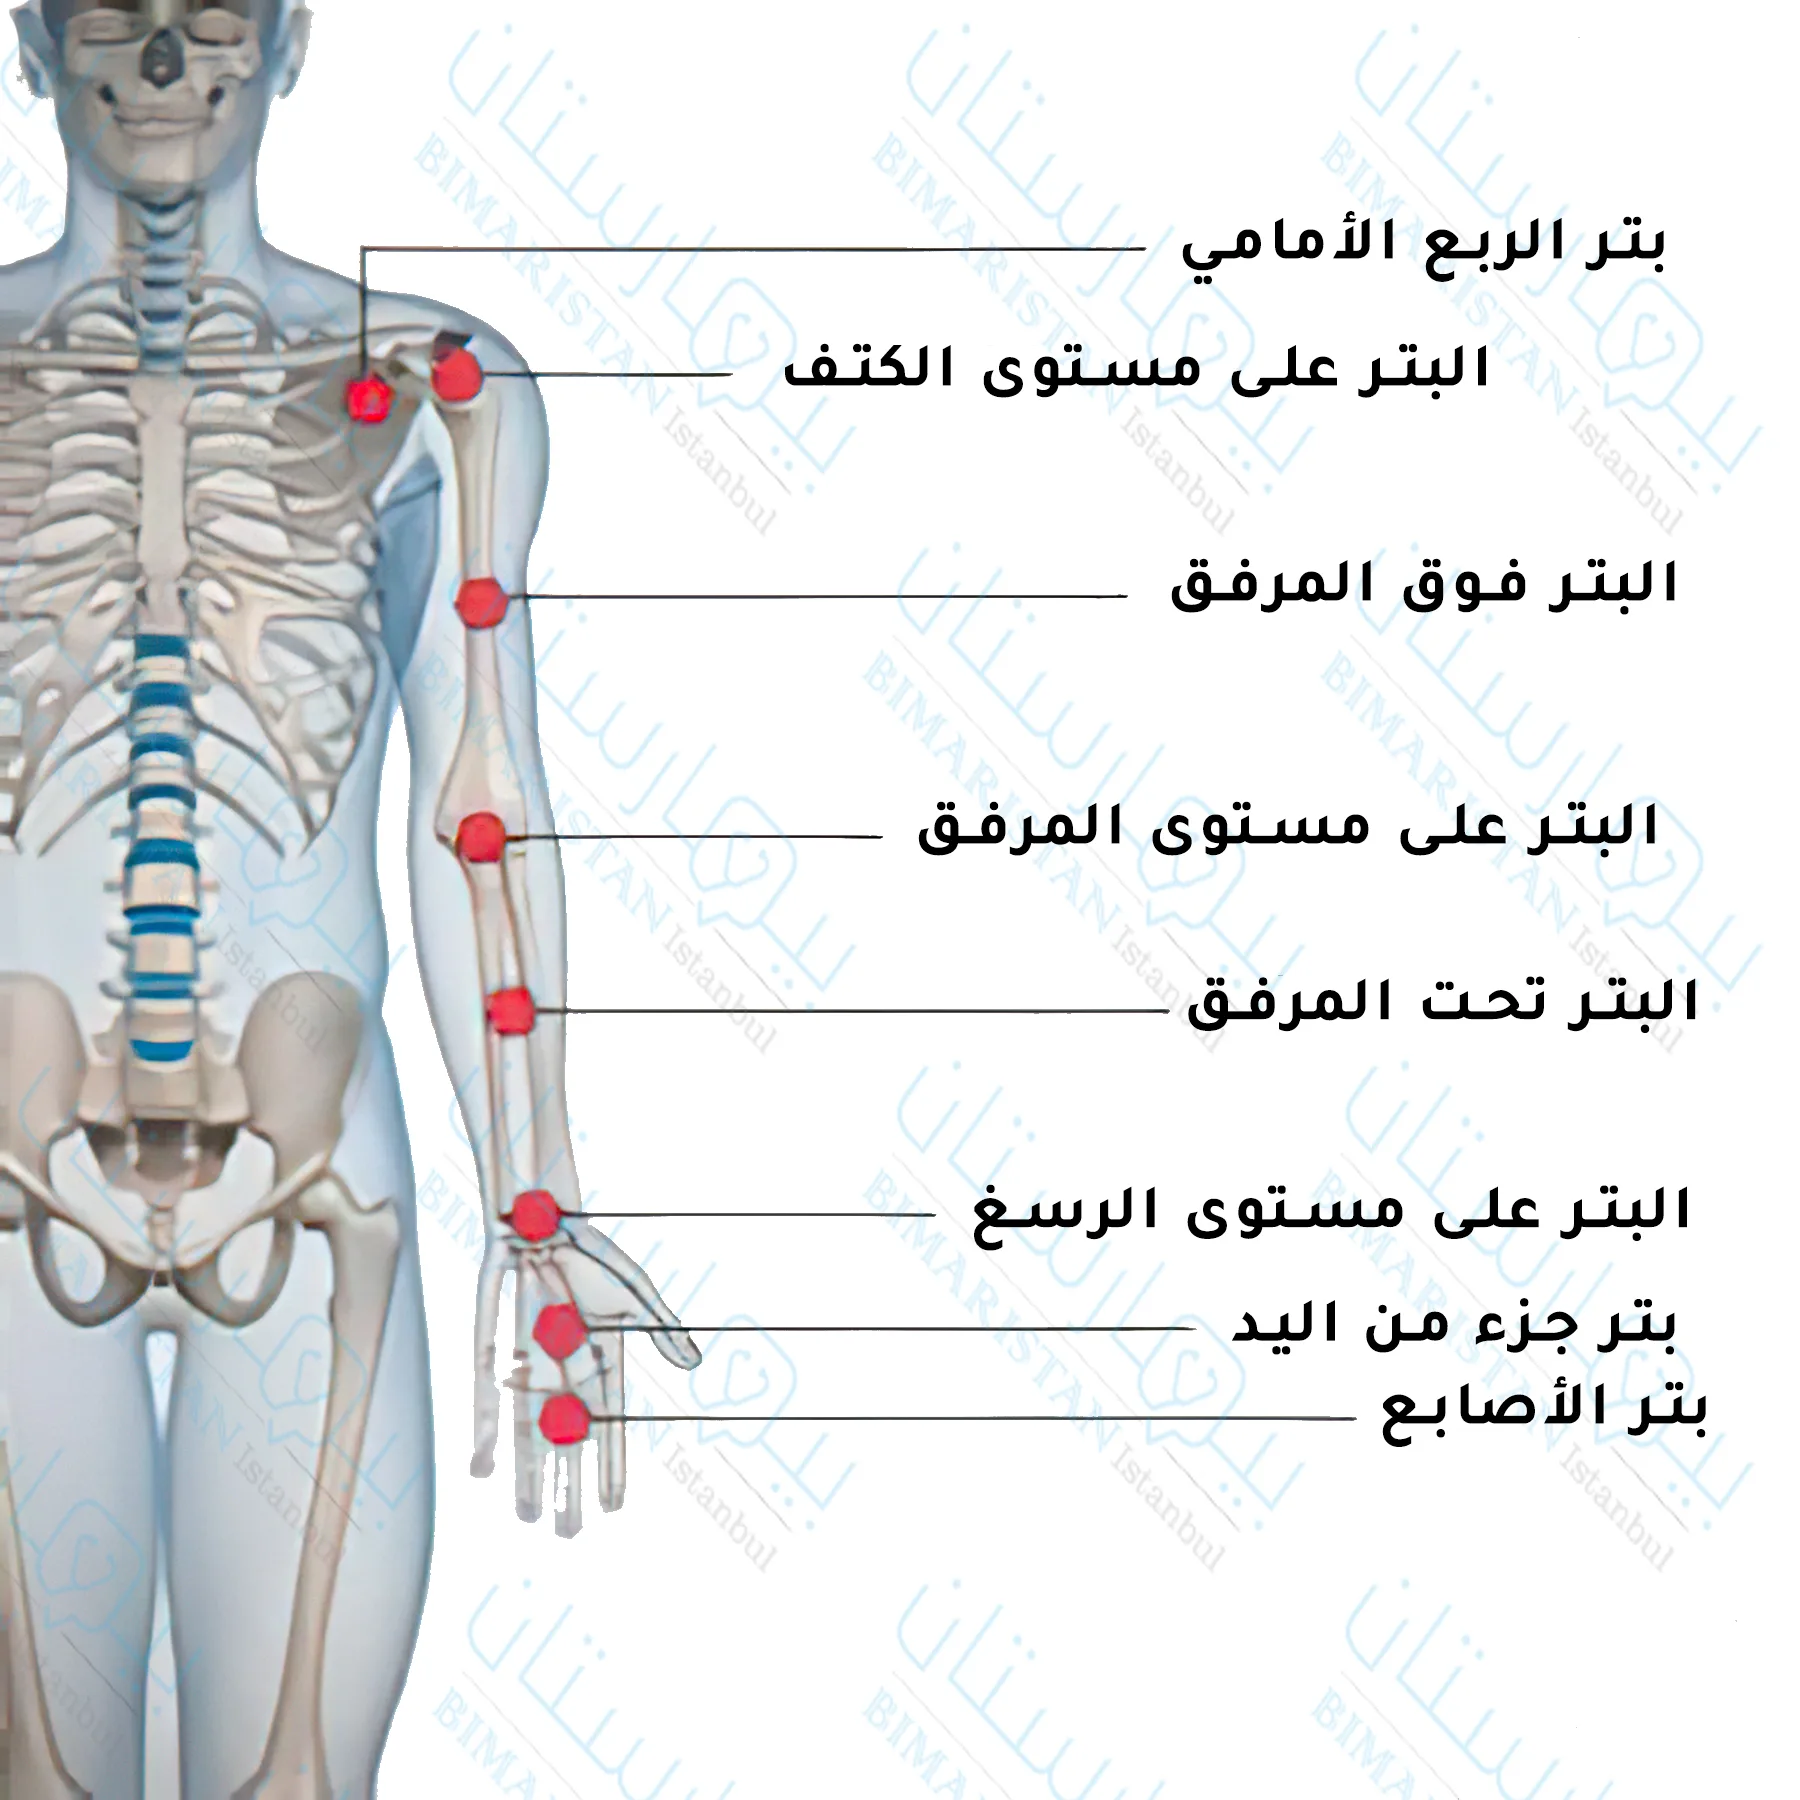 Picture of the levels of the amputation process in the upper extremity